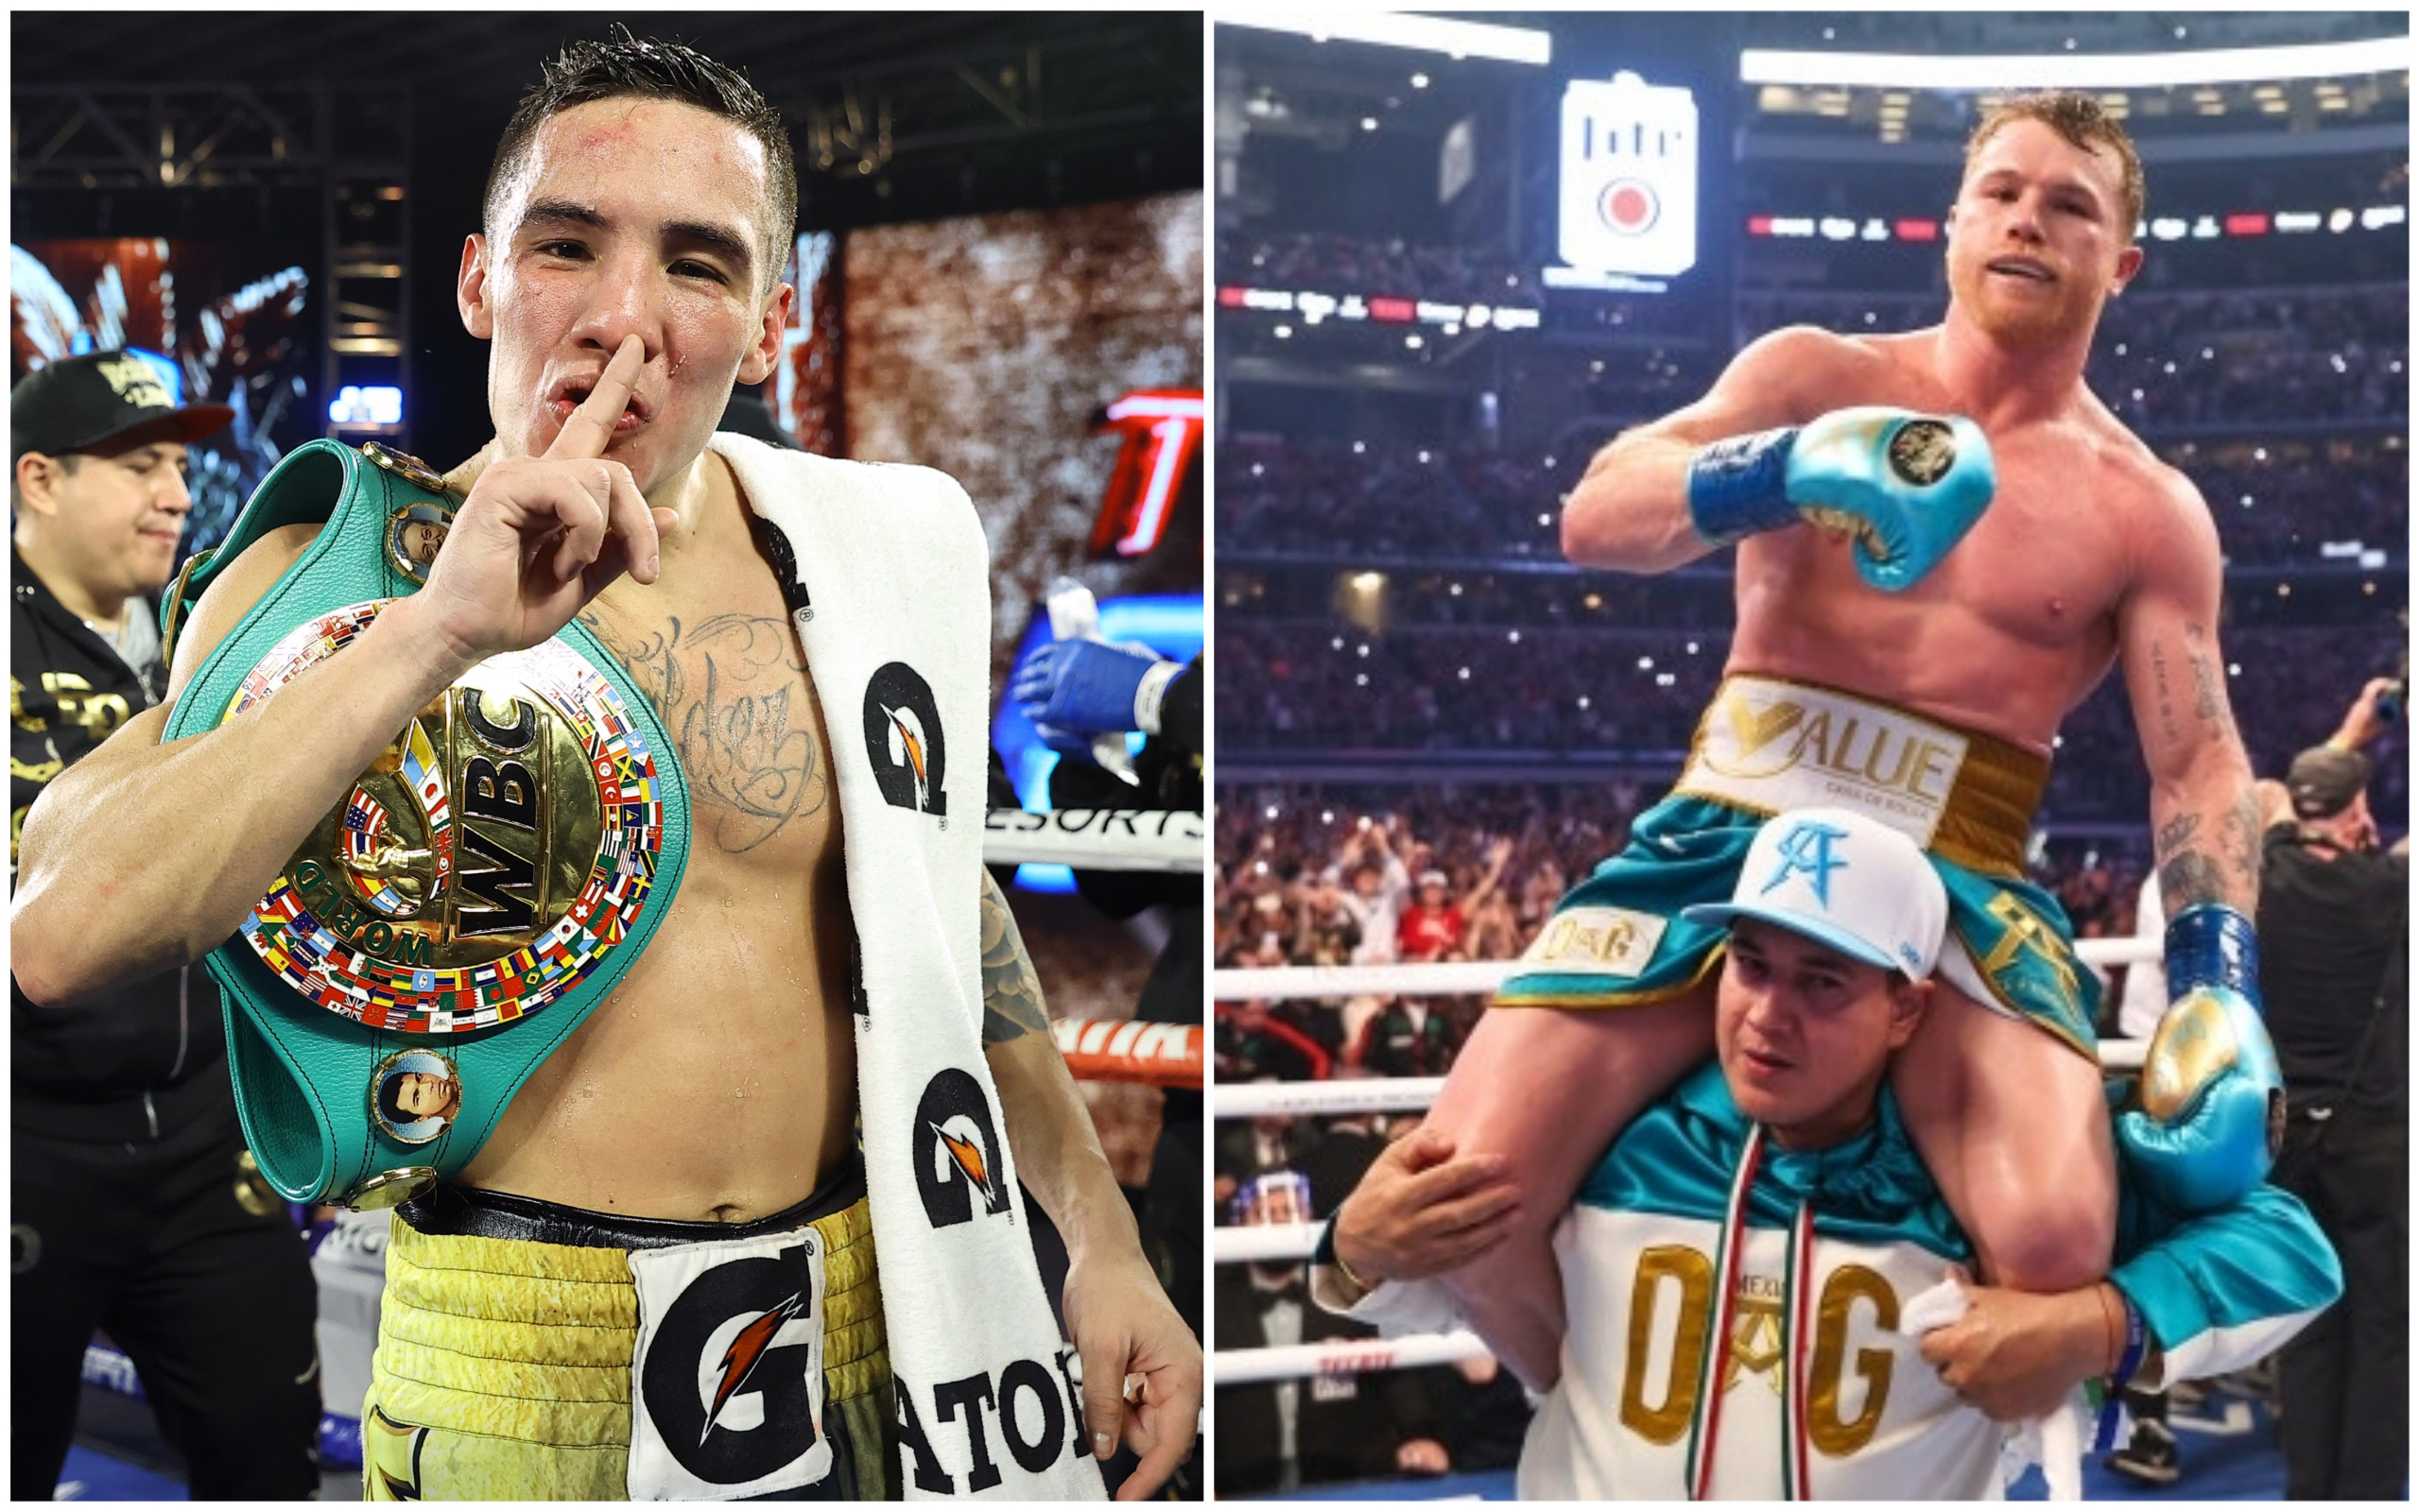 ‘The truth will come out’ – Oscar Valdez reveals advice from Canelo Alvarez after failed drugs test